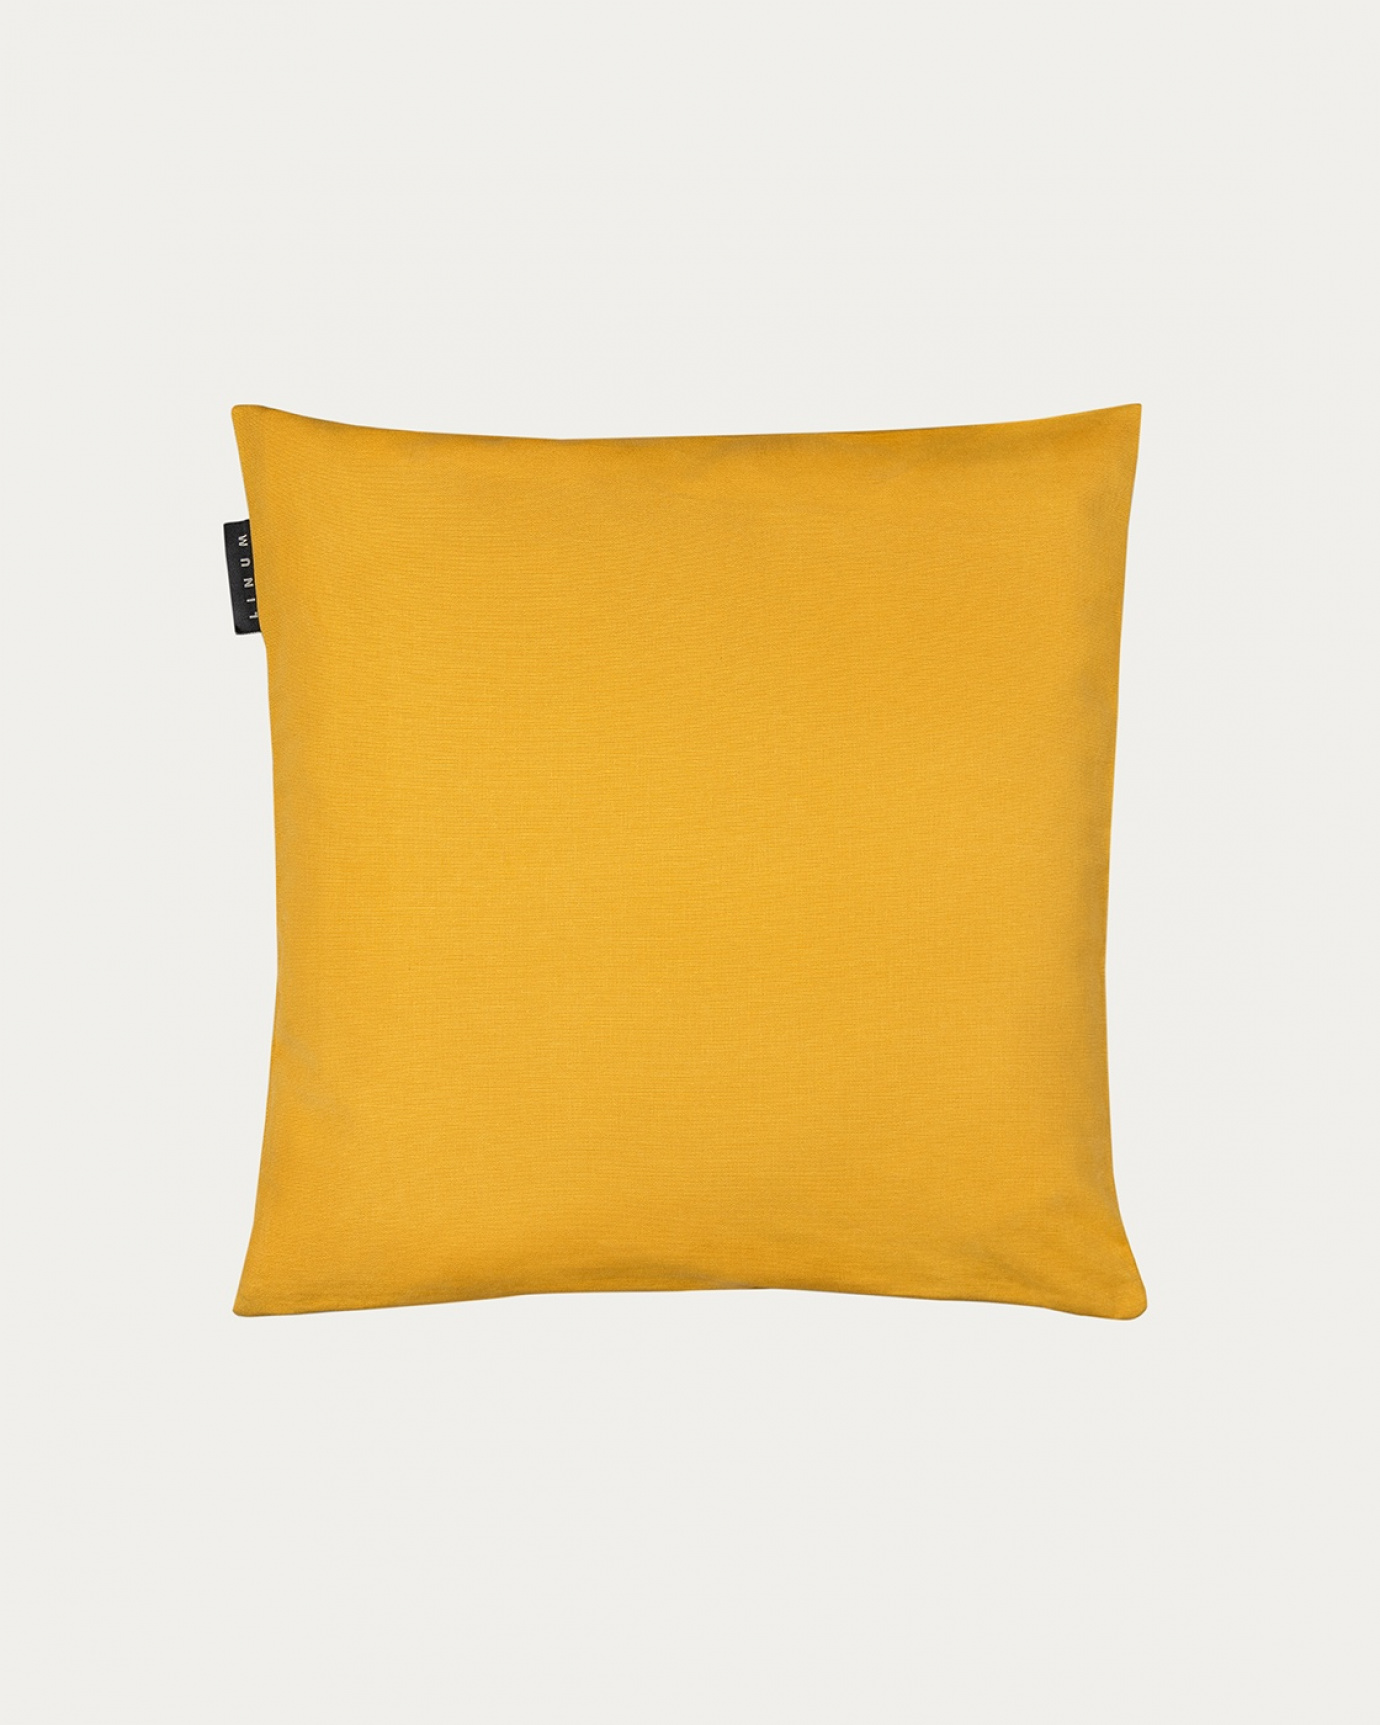 Product image tangerine yellow ANNABELL cushion cover made of soft cotton from LINUM DESIGN. Size 40x40 cm.